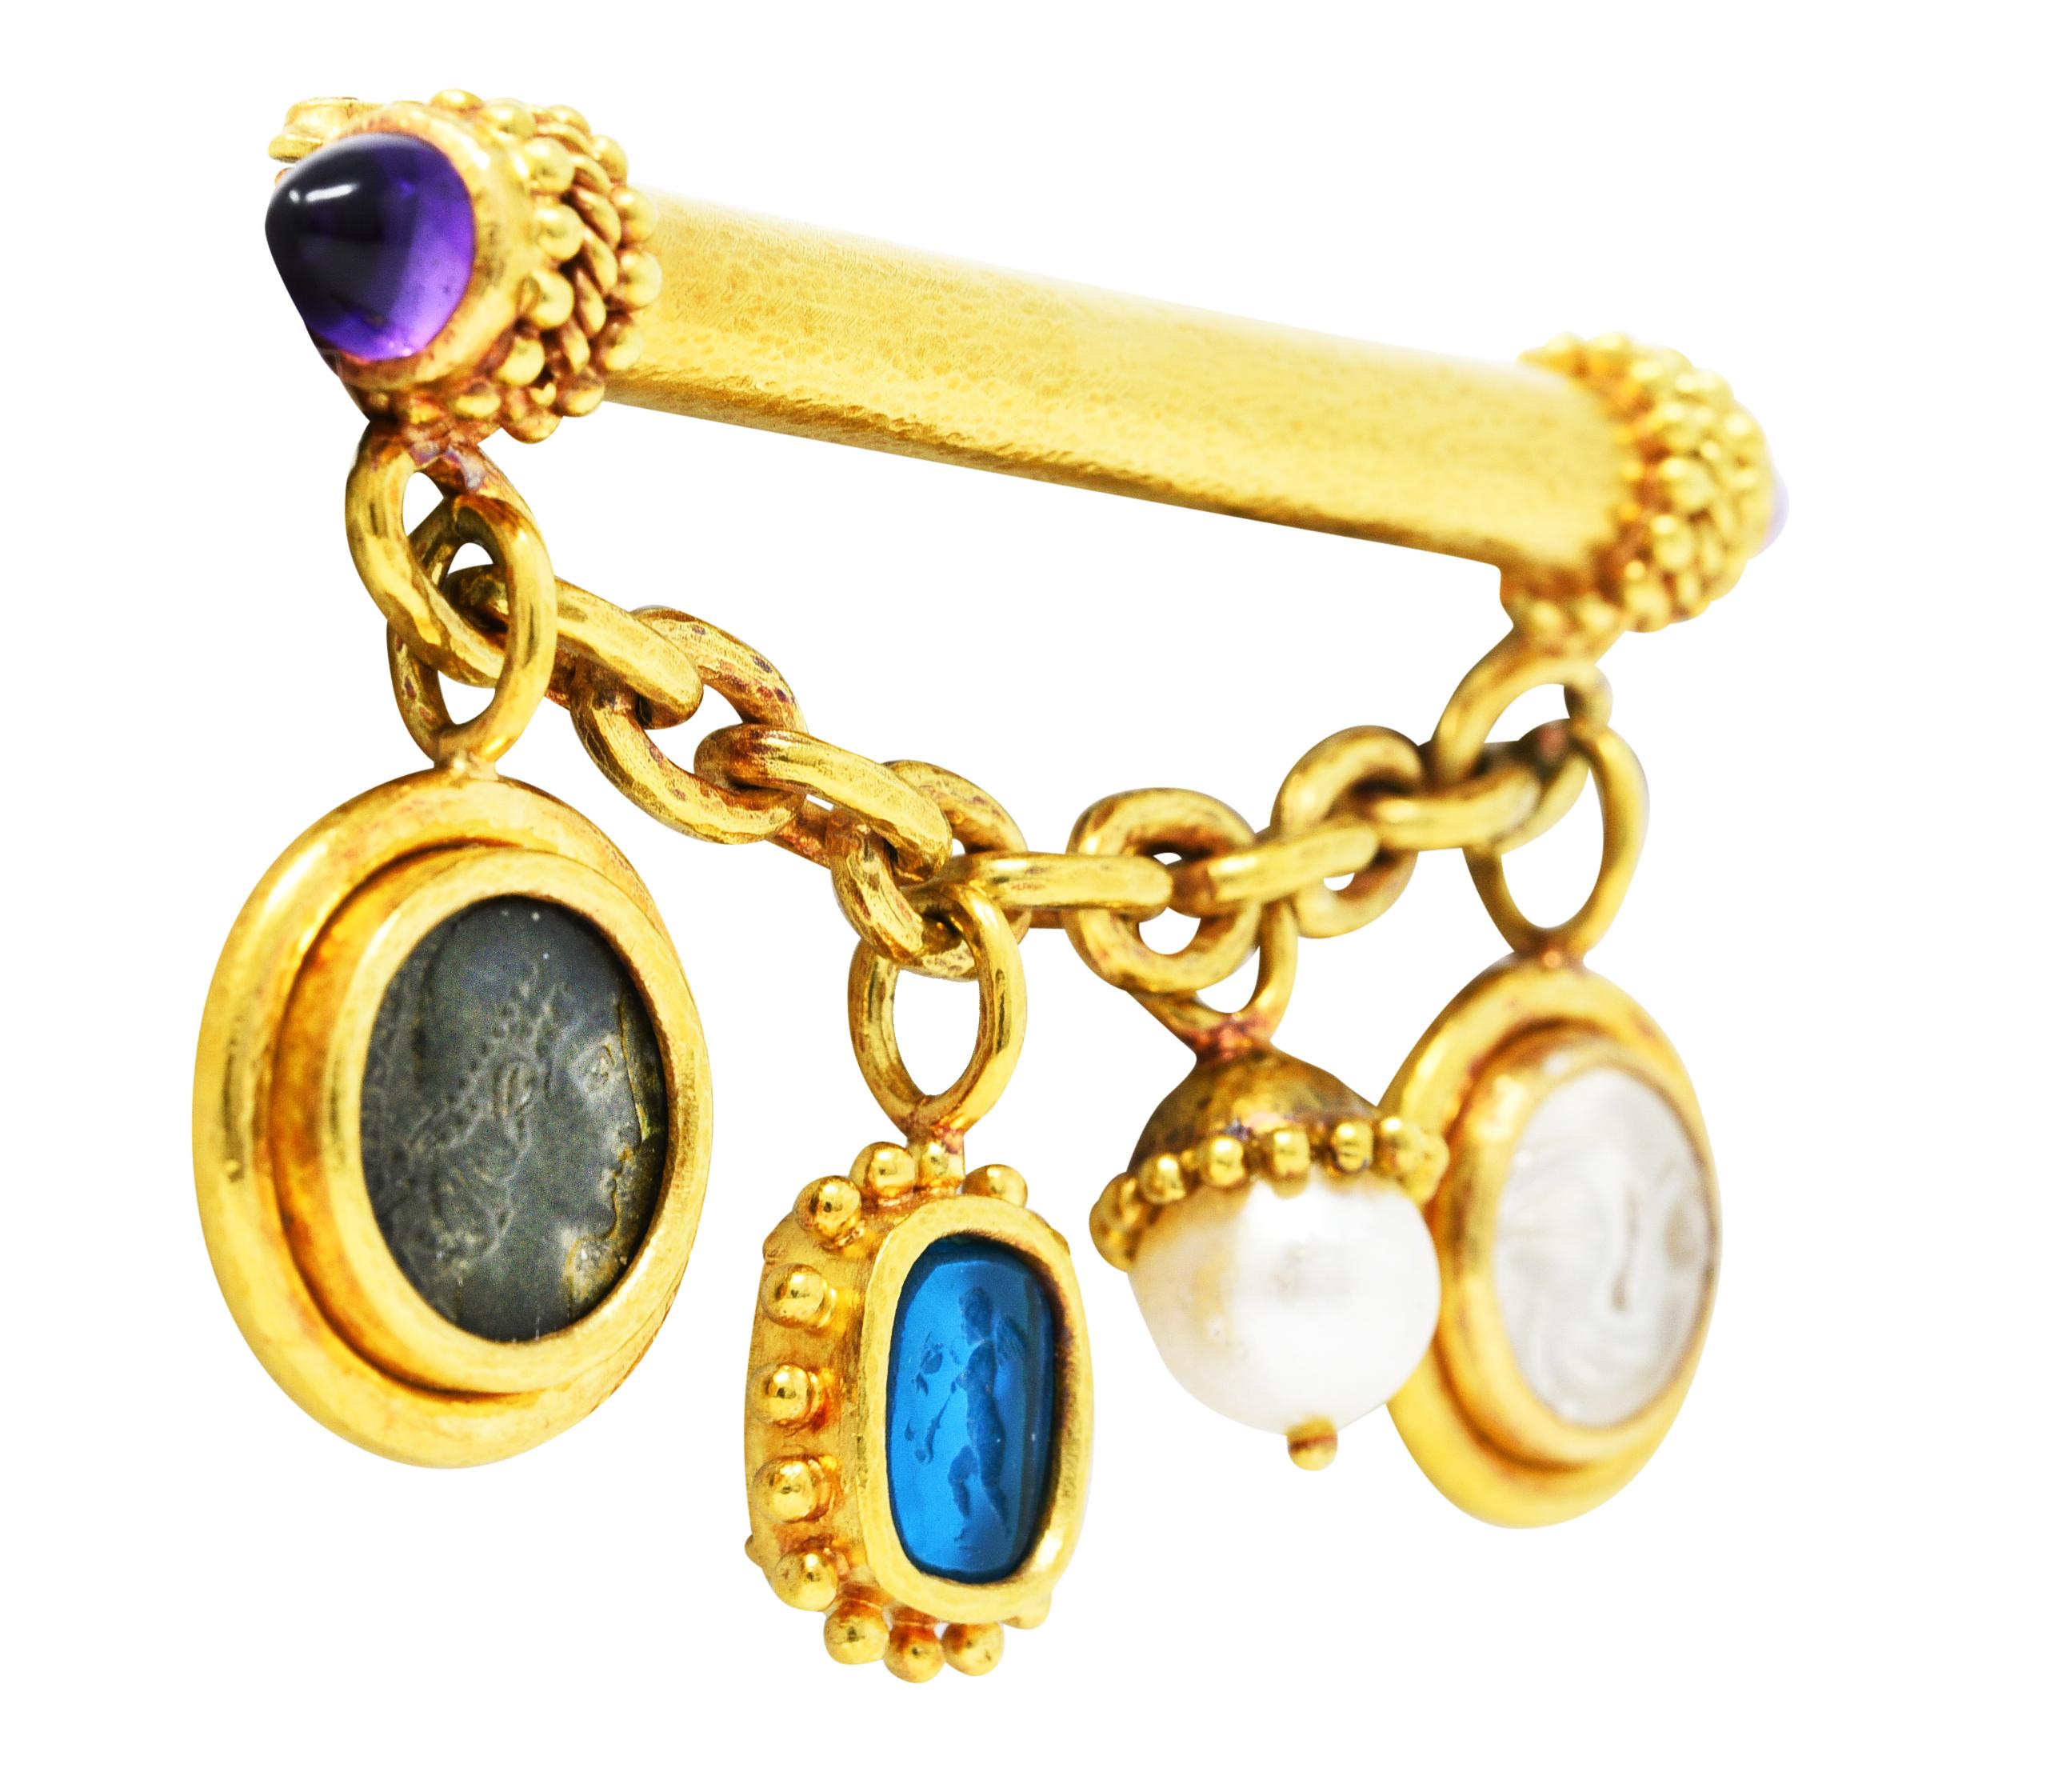 Brooch is designed as gold bar with ornate gold beaded terminals featuring amethyst bullet cabochons

Amethyst is transparent reddish-purple to purple with moderate color zoning and medium saturation

With swagged cable chain suspending pearl,